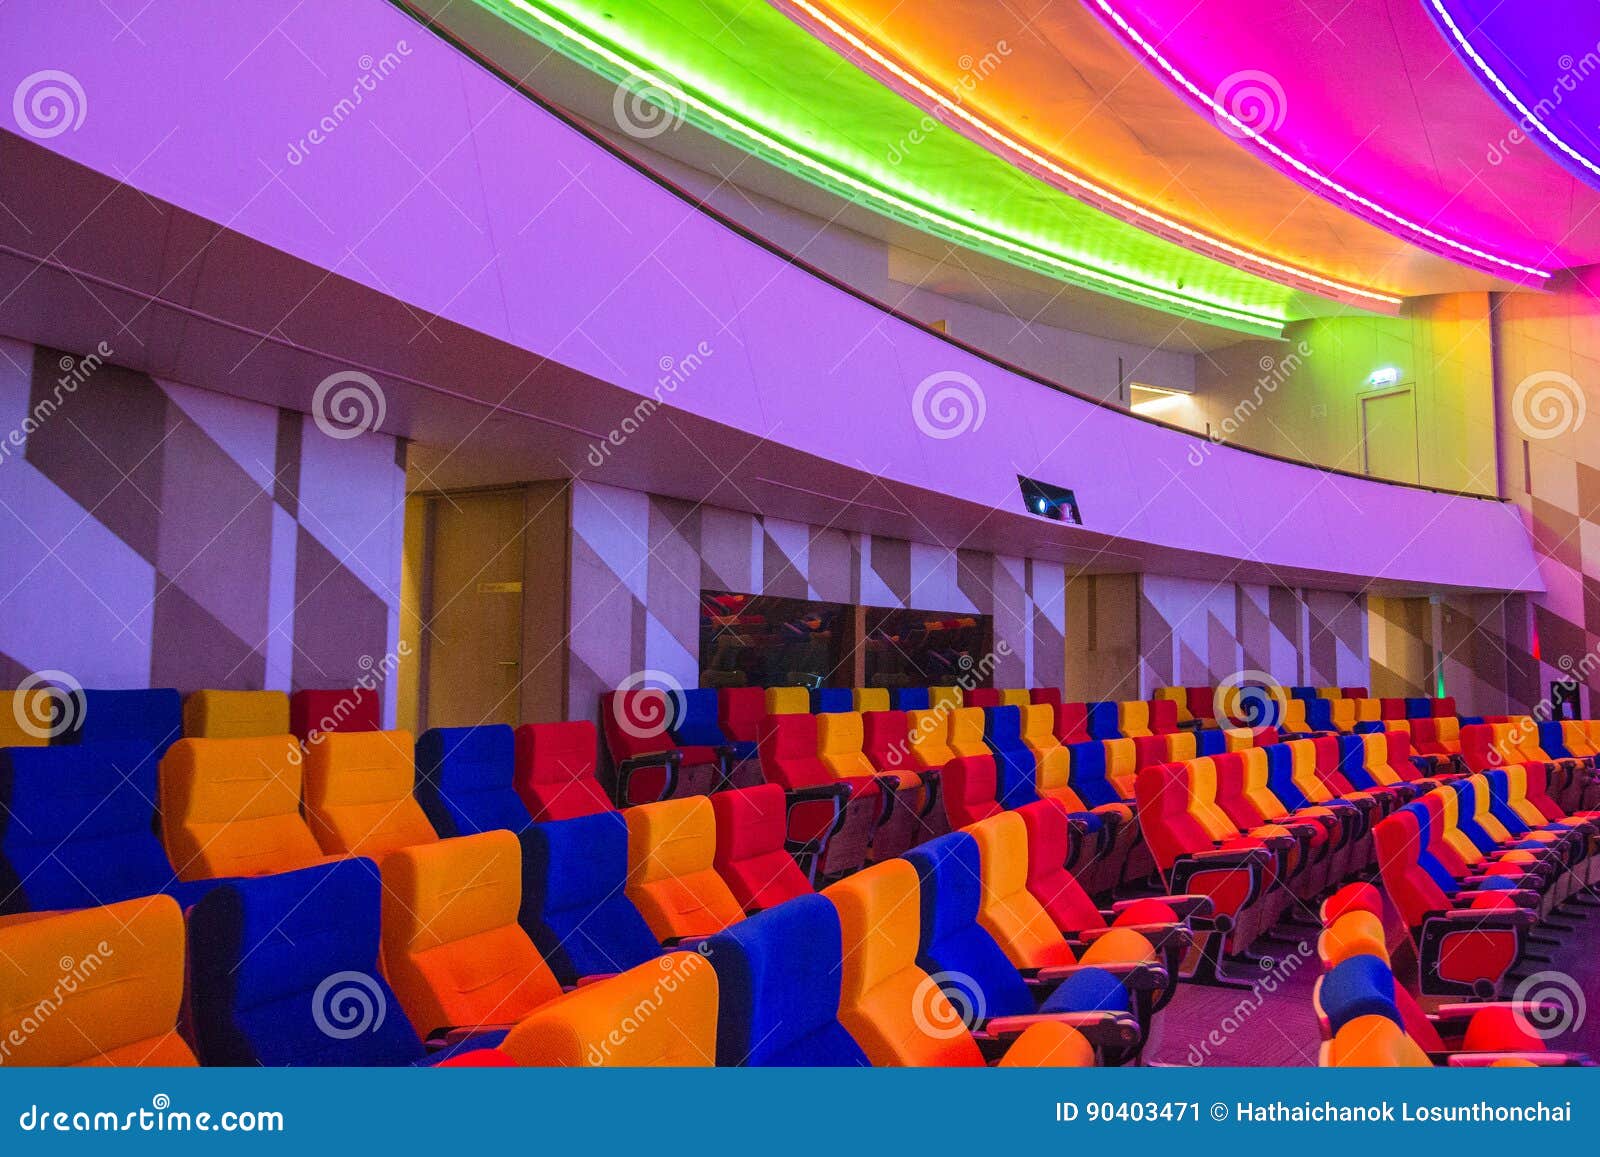 Empty Modern Auditorium With All Colorful Lights On Stock